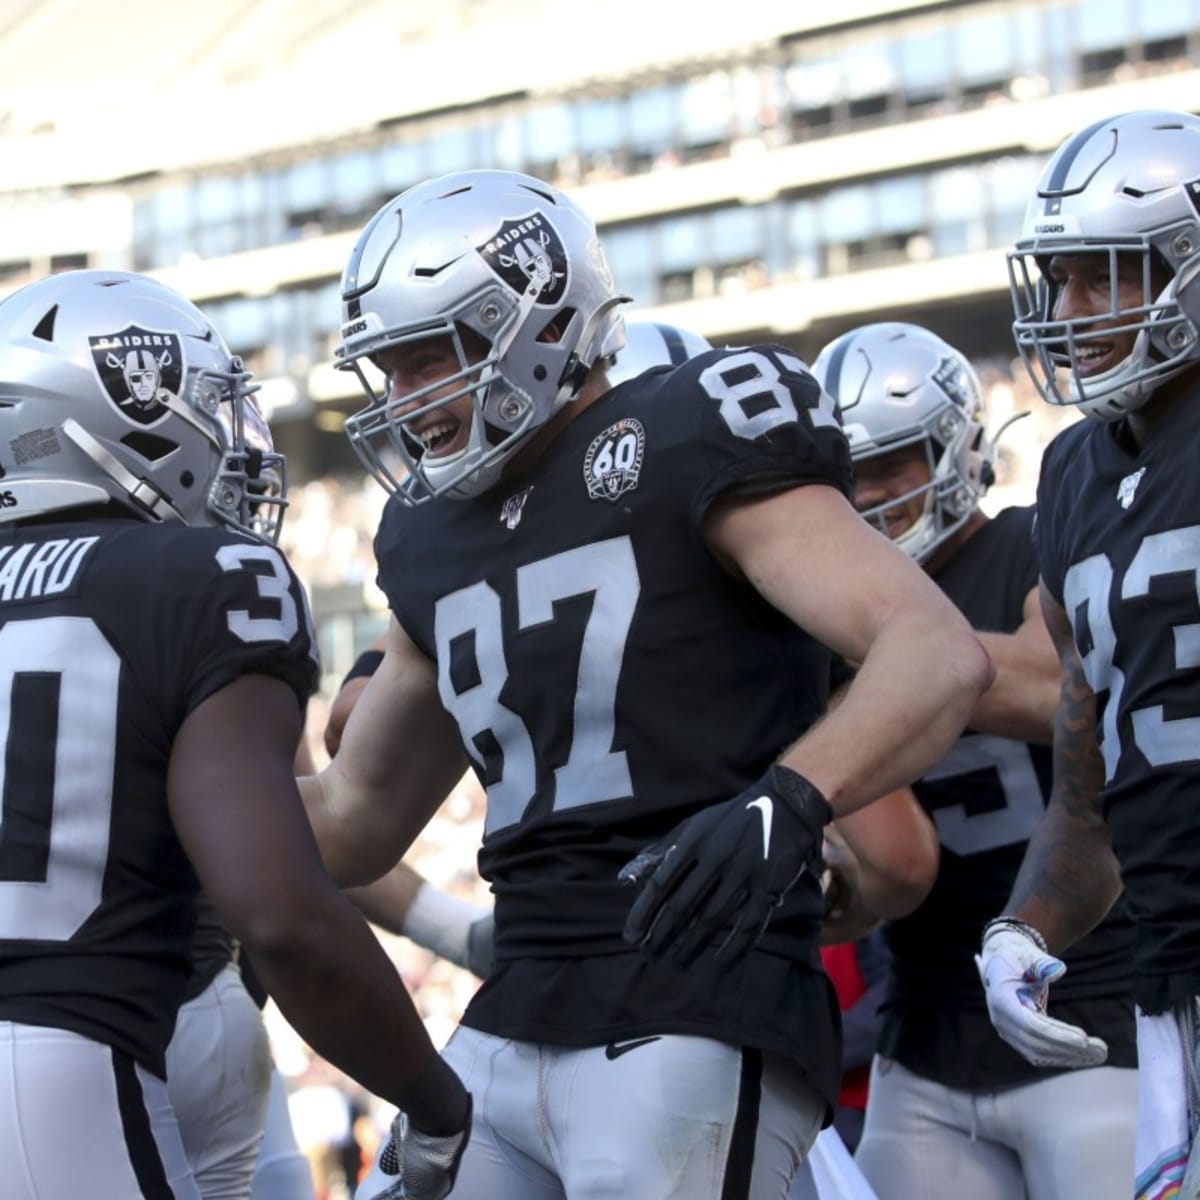 Raiders at Panthers: How to watch the Las Vegas Raiders' first game